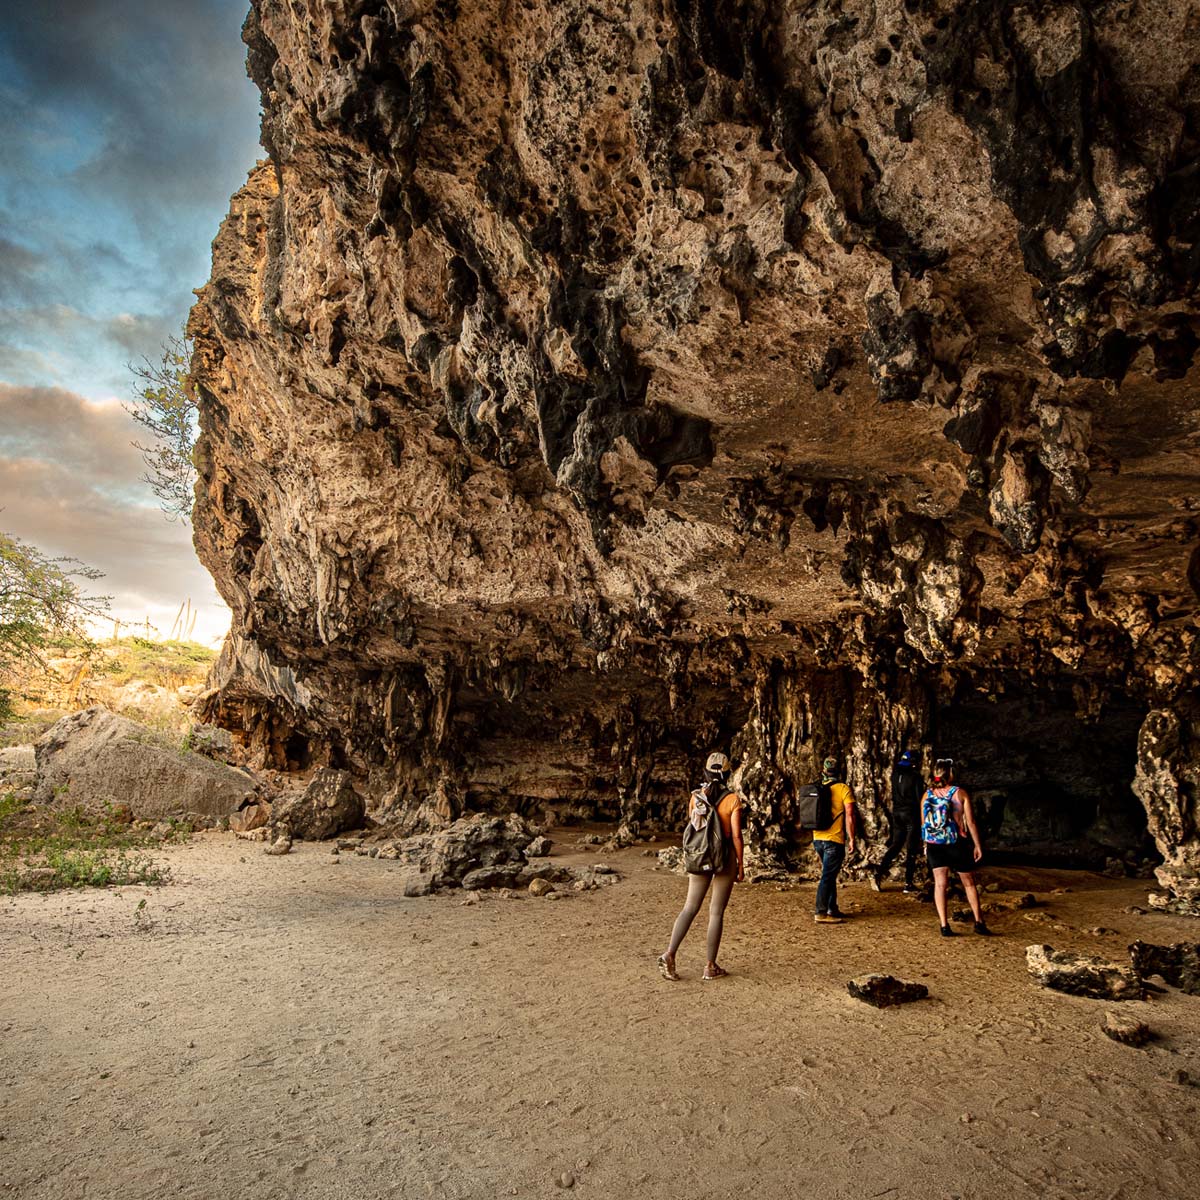 Group of people walking into an cave